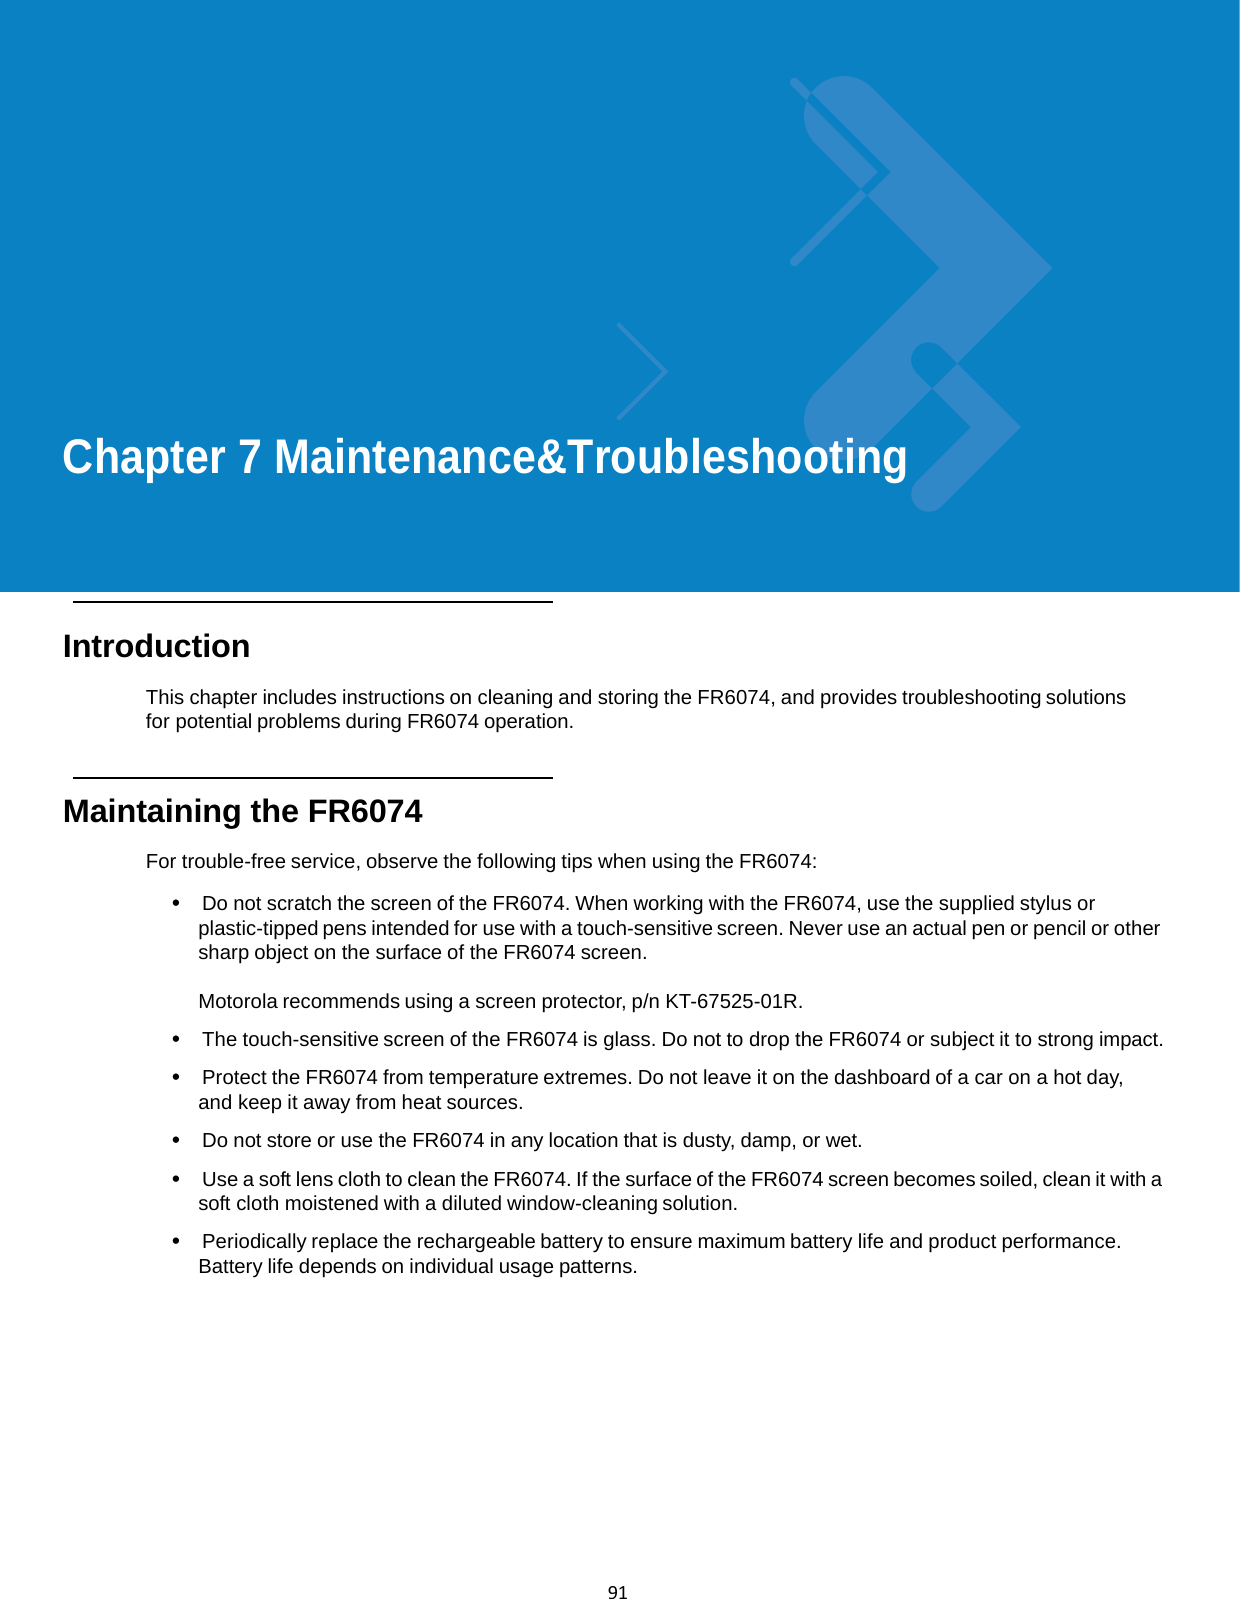  91             Chapter 7 Maintenance&amp;Troubleshooting       Introduction  This chapter includes instructions on cleaning and storing the FR6074, and provides troubleshooting solutions for potential problems during FR6074 operation.    Maintaining the FR6074  For trouble-free service, observe the following tips when using the FR6074:  •  Do not scratch the screen of the FR6074. When working with the FR6074, use the supplied stylus or plastic-tipped pens intended for use with a touch-sensitive screen. Never use an actual pen or pencil or other sharp object on the surface of the FR6074 screen.  Motorola recommends using a screen protector, p/n KT-67525-01R.  •  The touch-sensitive screen of the FR6074 is glass. Do not to drop the FR6074 or subject it to strong impact.  •  Protect the FR6074 from temperature extremes. Do not leave it on the dashboard of a car on a hot day, and keep it away from heat sources.  •  Do not store or use the FR6074 in any location that is dusty, damp, or wet.  •  Use a soft lens cloth to clean the FR6074. If the surface of the FR6074 screen becomes soiled, clean it with a soft cloth moistened with a diluted window-cleaning solution.  •  Periodically replace the rechargeable battery to ensure maximum battery life and product performance. Battery life depends on individual usage patterns. 